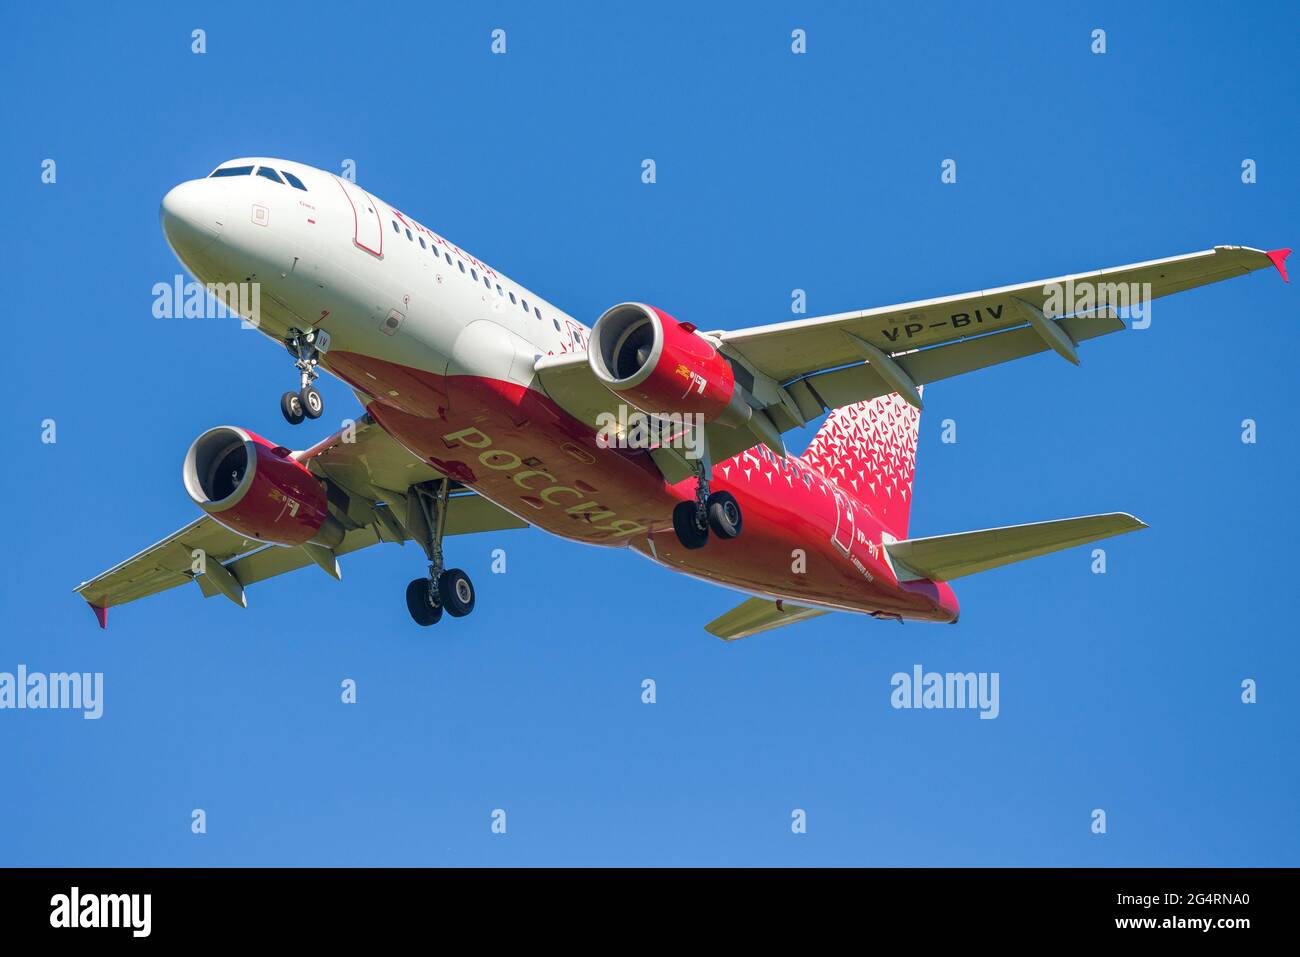 SAINT PETERSBURG, RUSSIA - OCTOBER 28, 2020: Airbus A319-115LR "Omsk" (VP-BIV) aircraft of Rossiya airlines on the glide path close-up Stock Photo